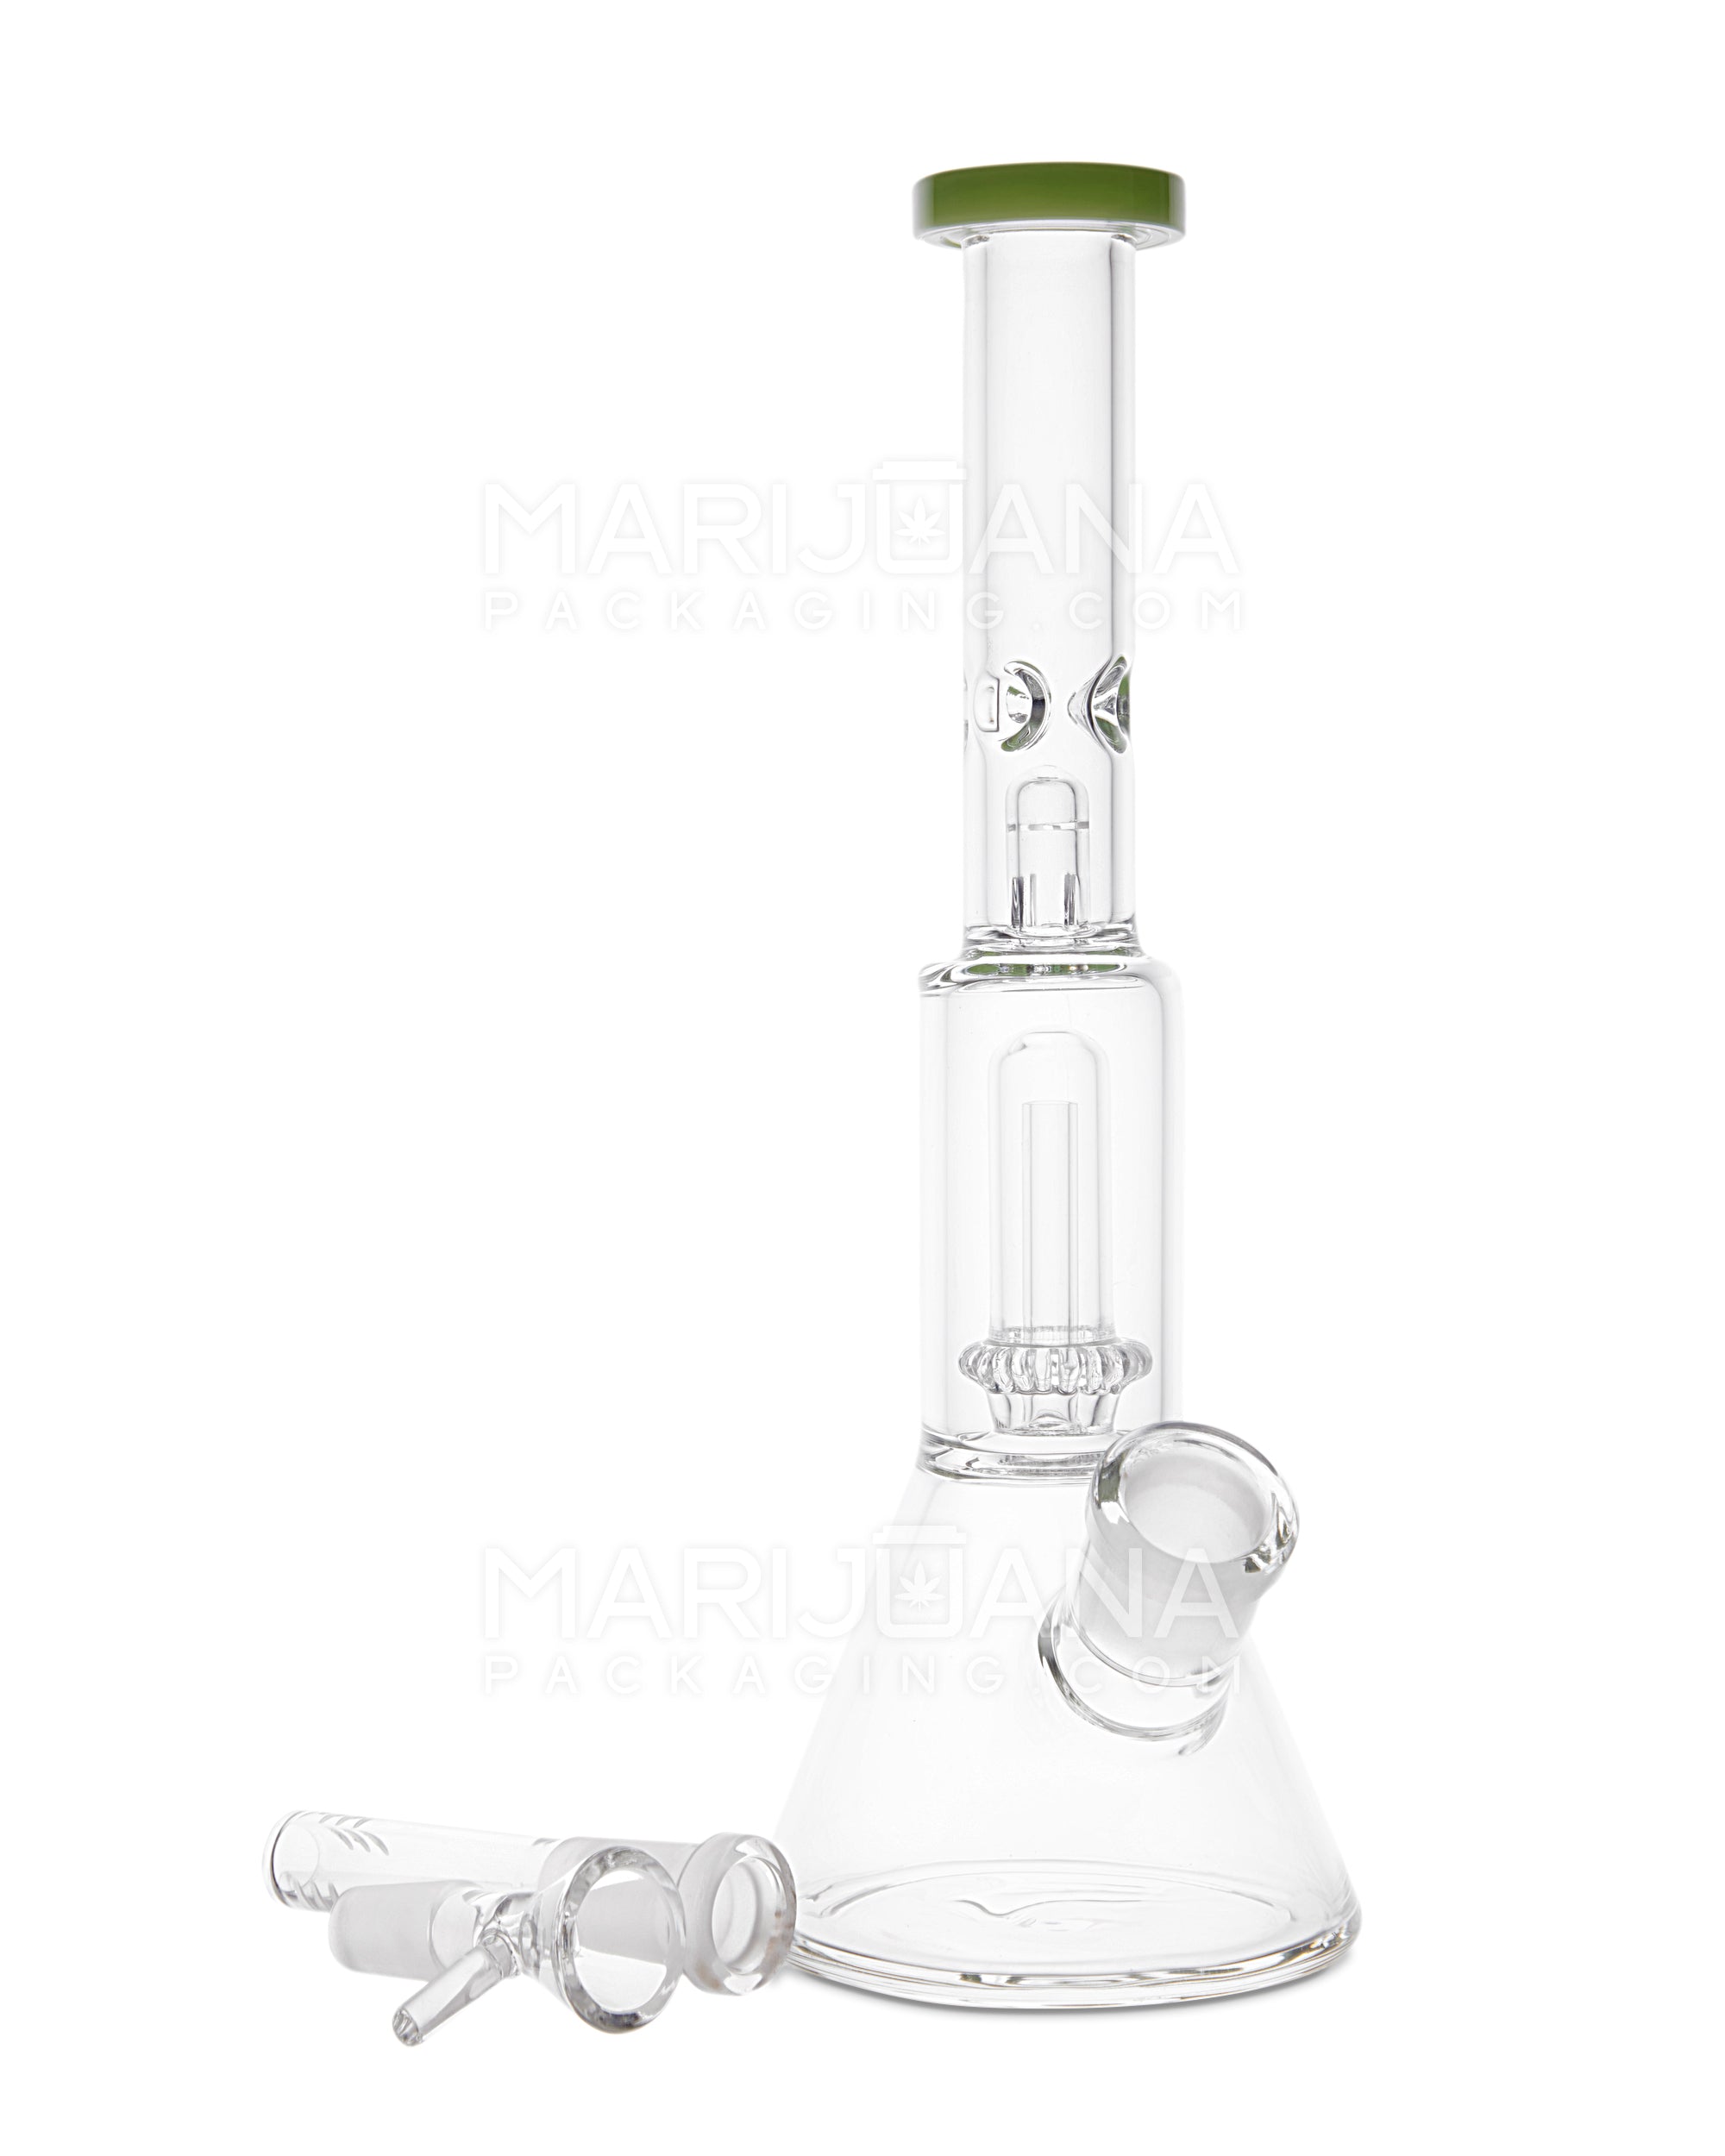 Straight Neck Showerhead Perc Glass Beaker Water Pipe w/ Ice Catcher | 10.5in Tall - 14mm Bowl - Slime